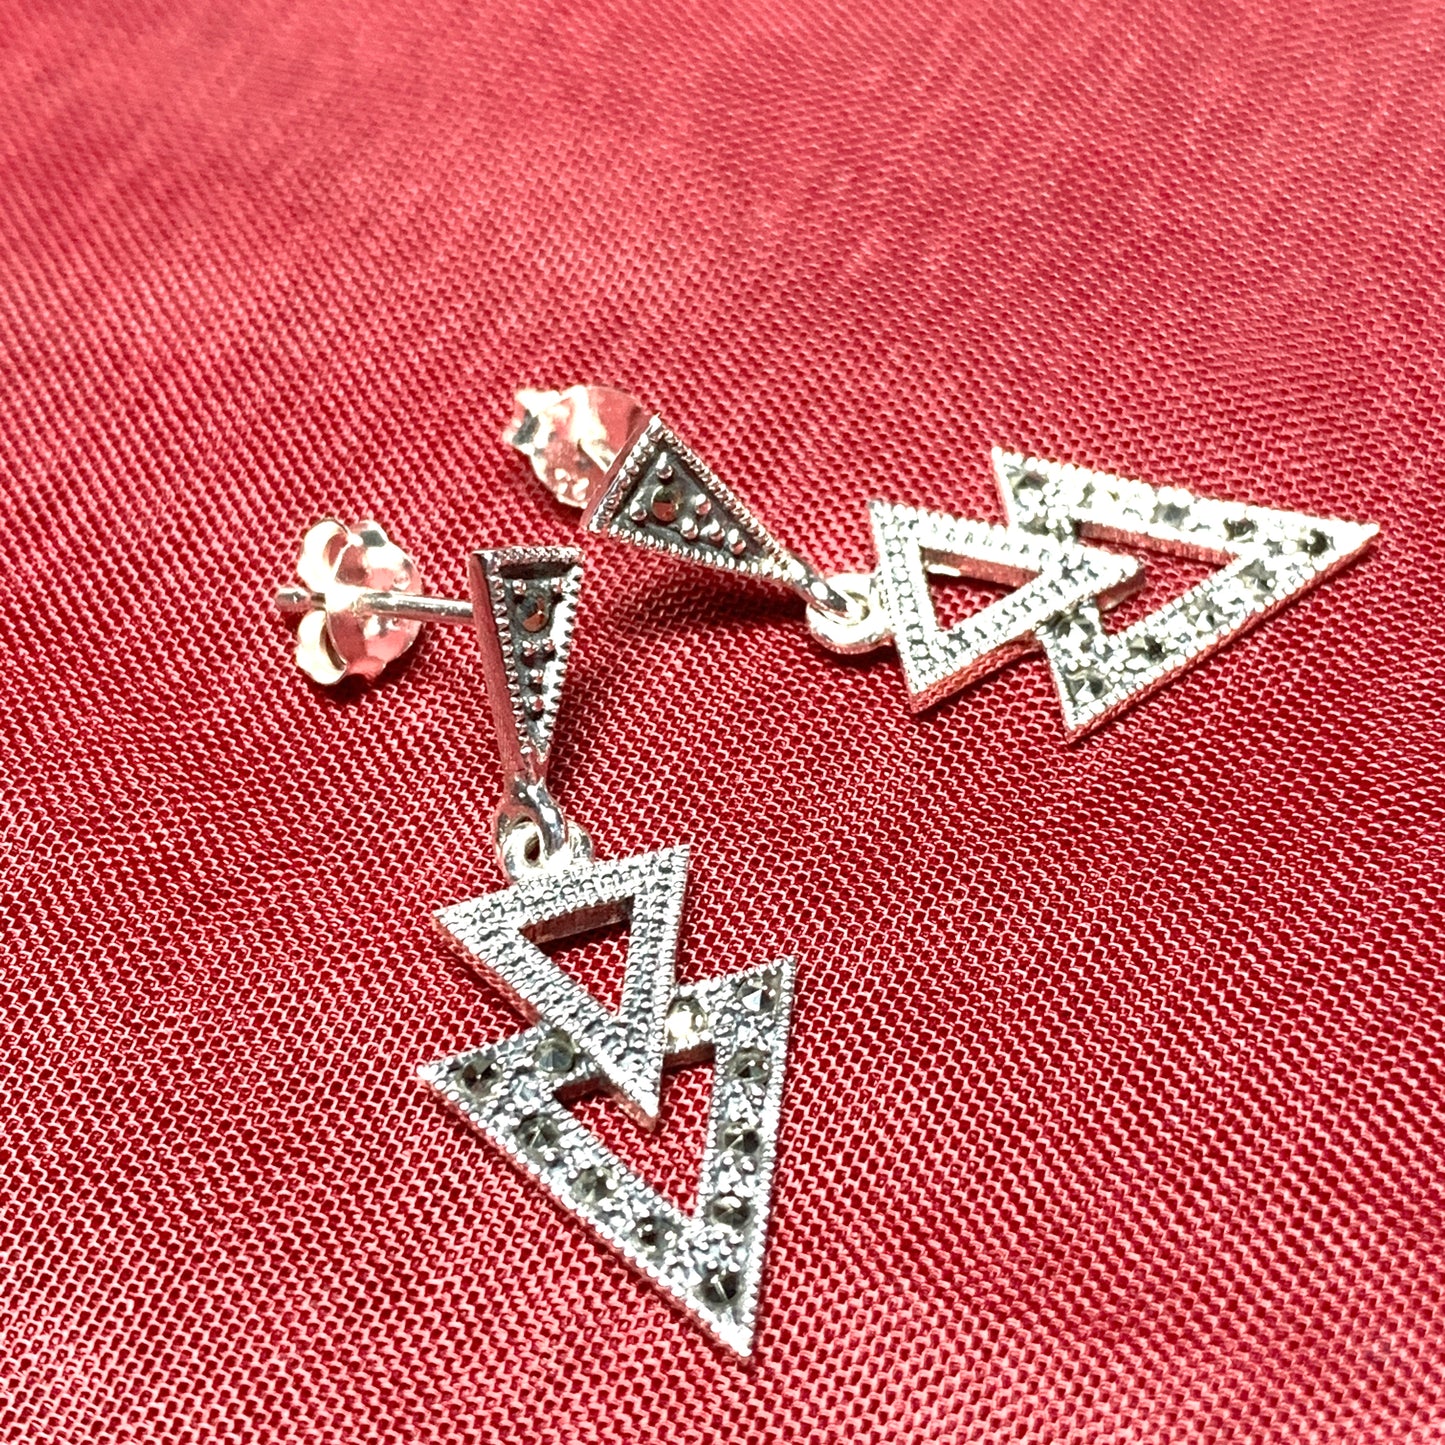 Marcasite Triangle Shaped Sterling Silver Earrings